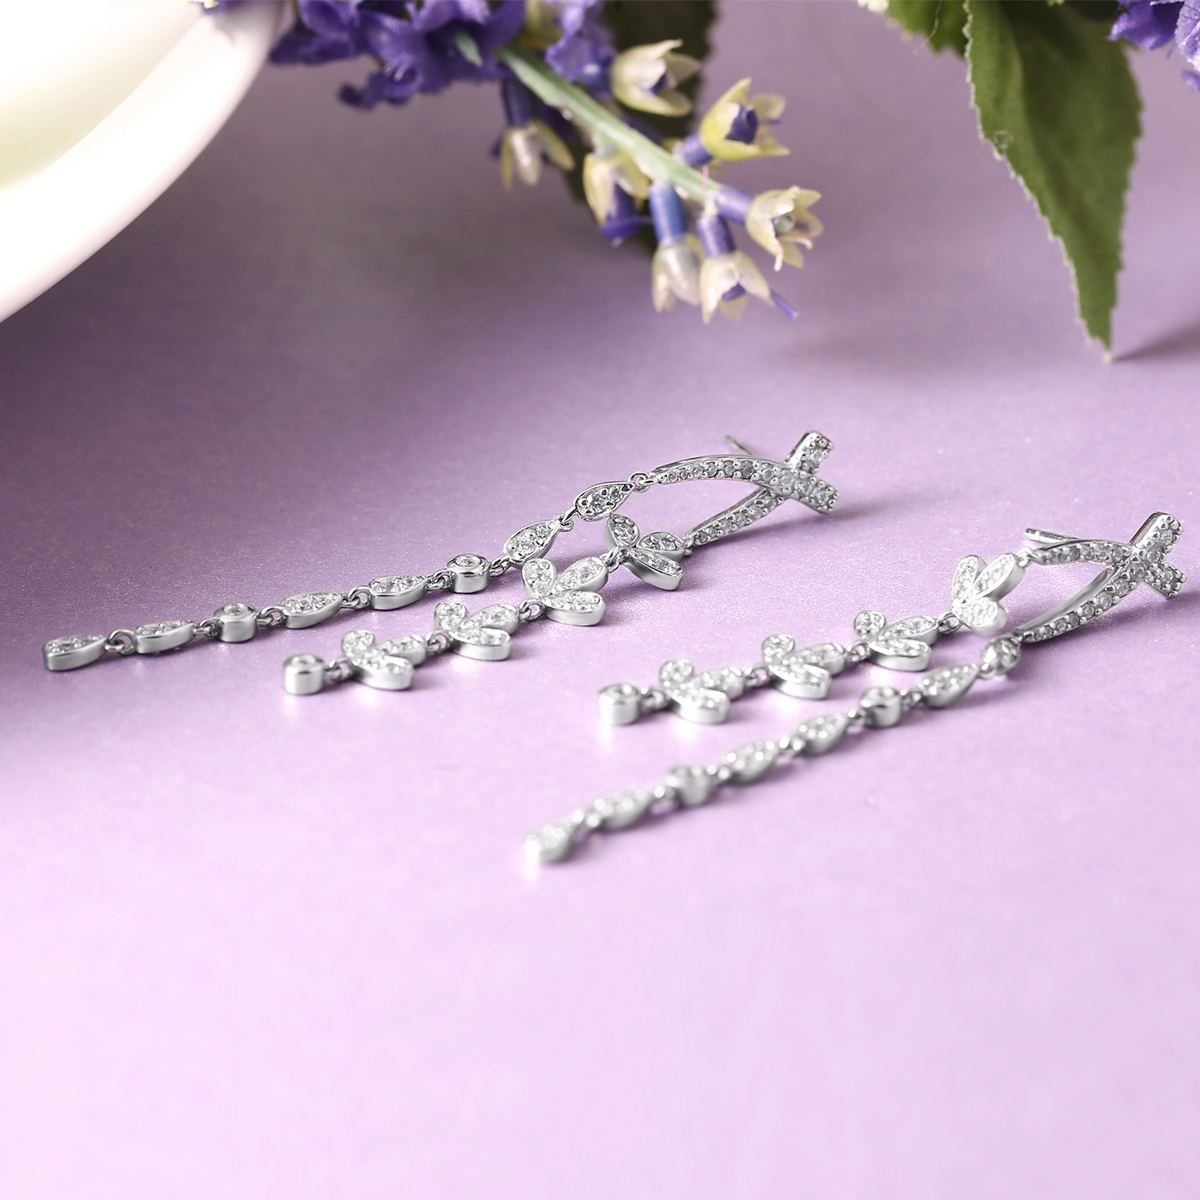 S925 sterling silver lavender series with zircon earrings long length suitable for daily use